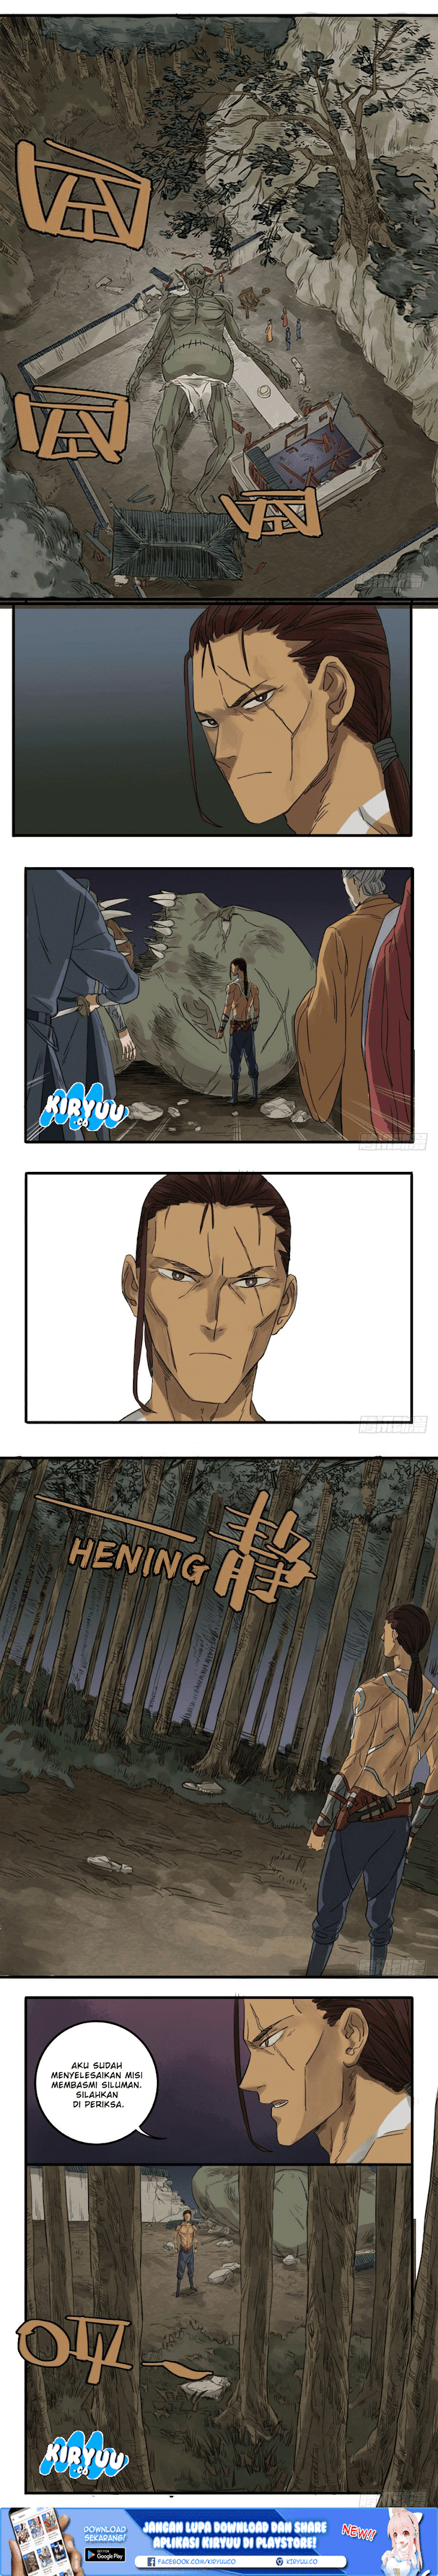 Martial Legacy Chapter 07